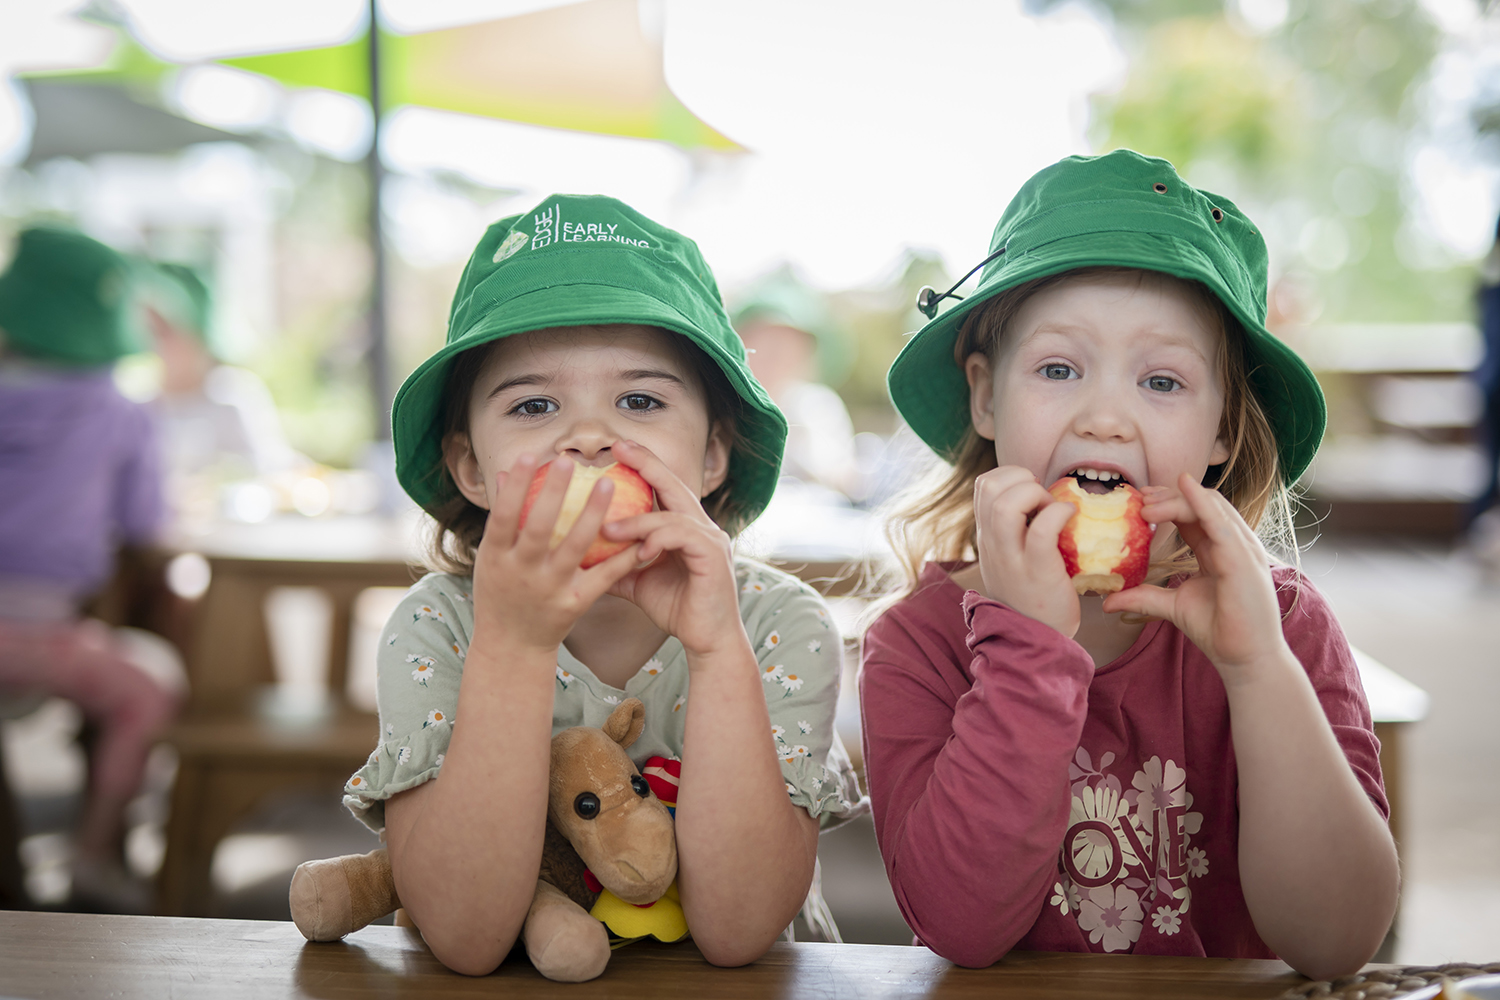 Two girls eating apples